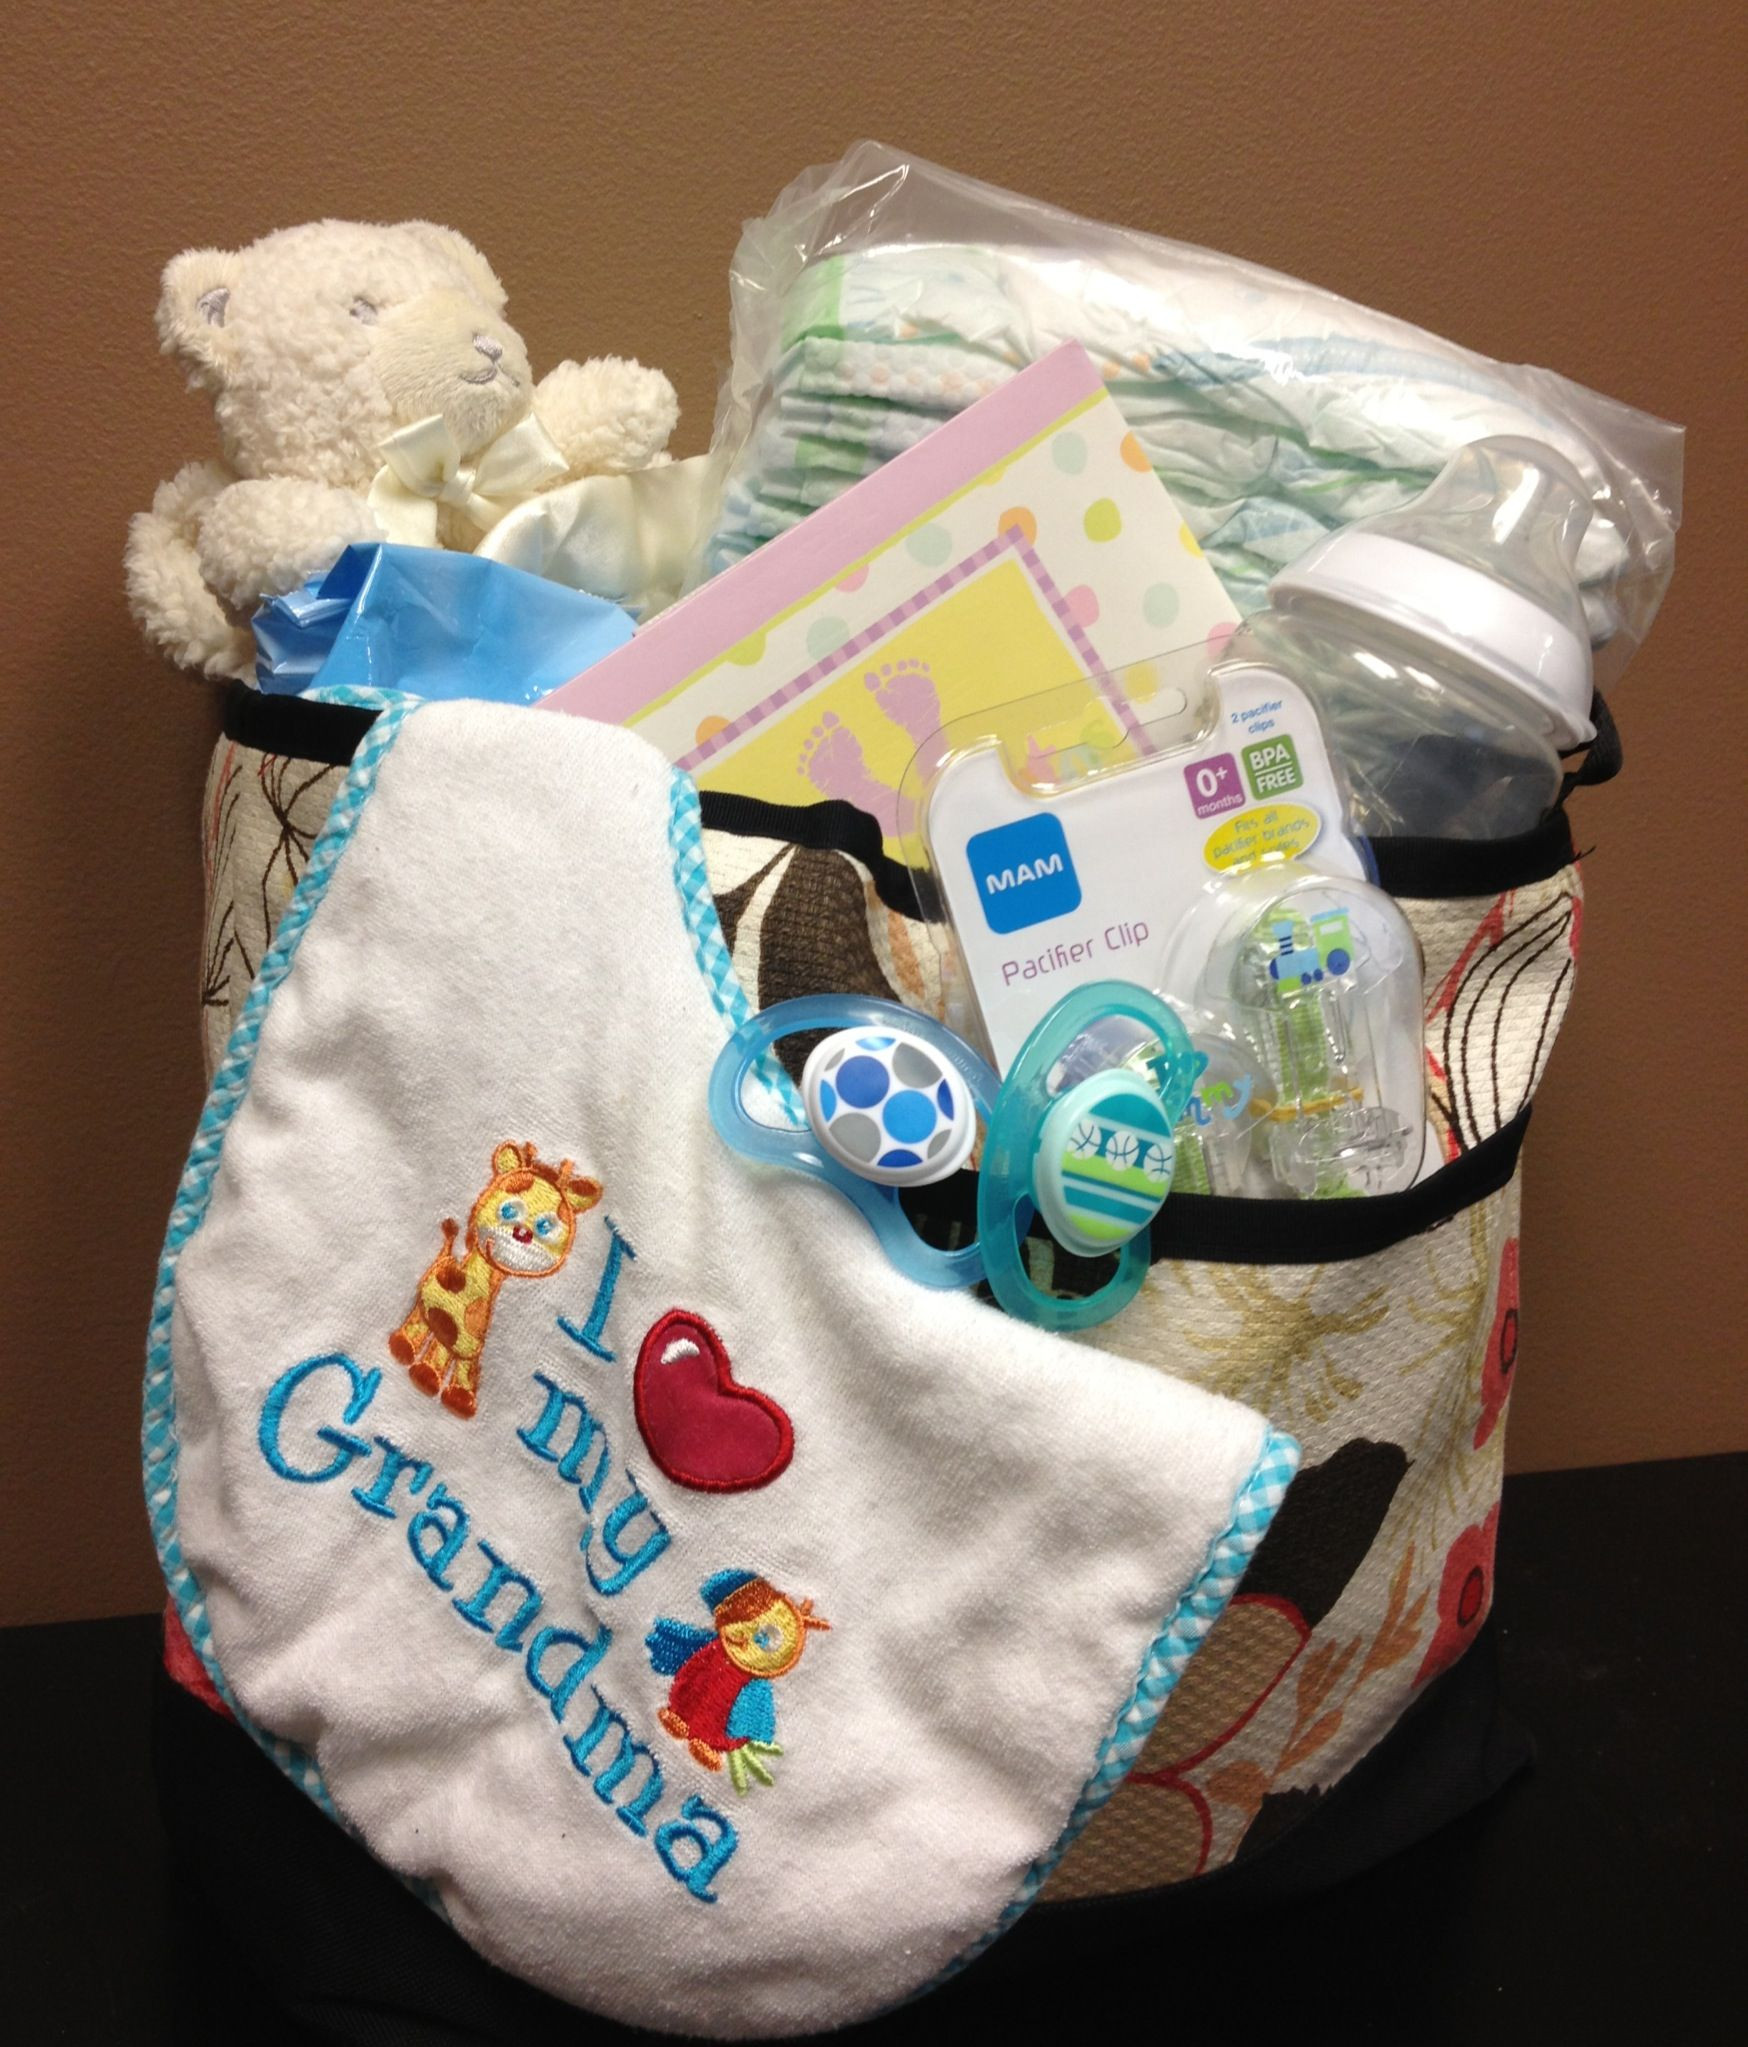 Grandparent Gift Ideas From Baby
 Check out these great t ideas for Grandma to be … or